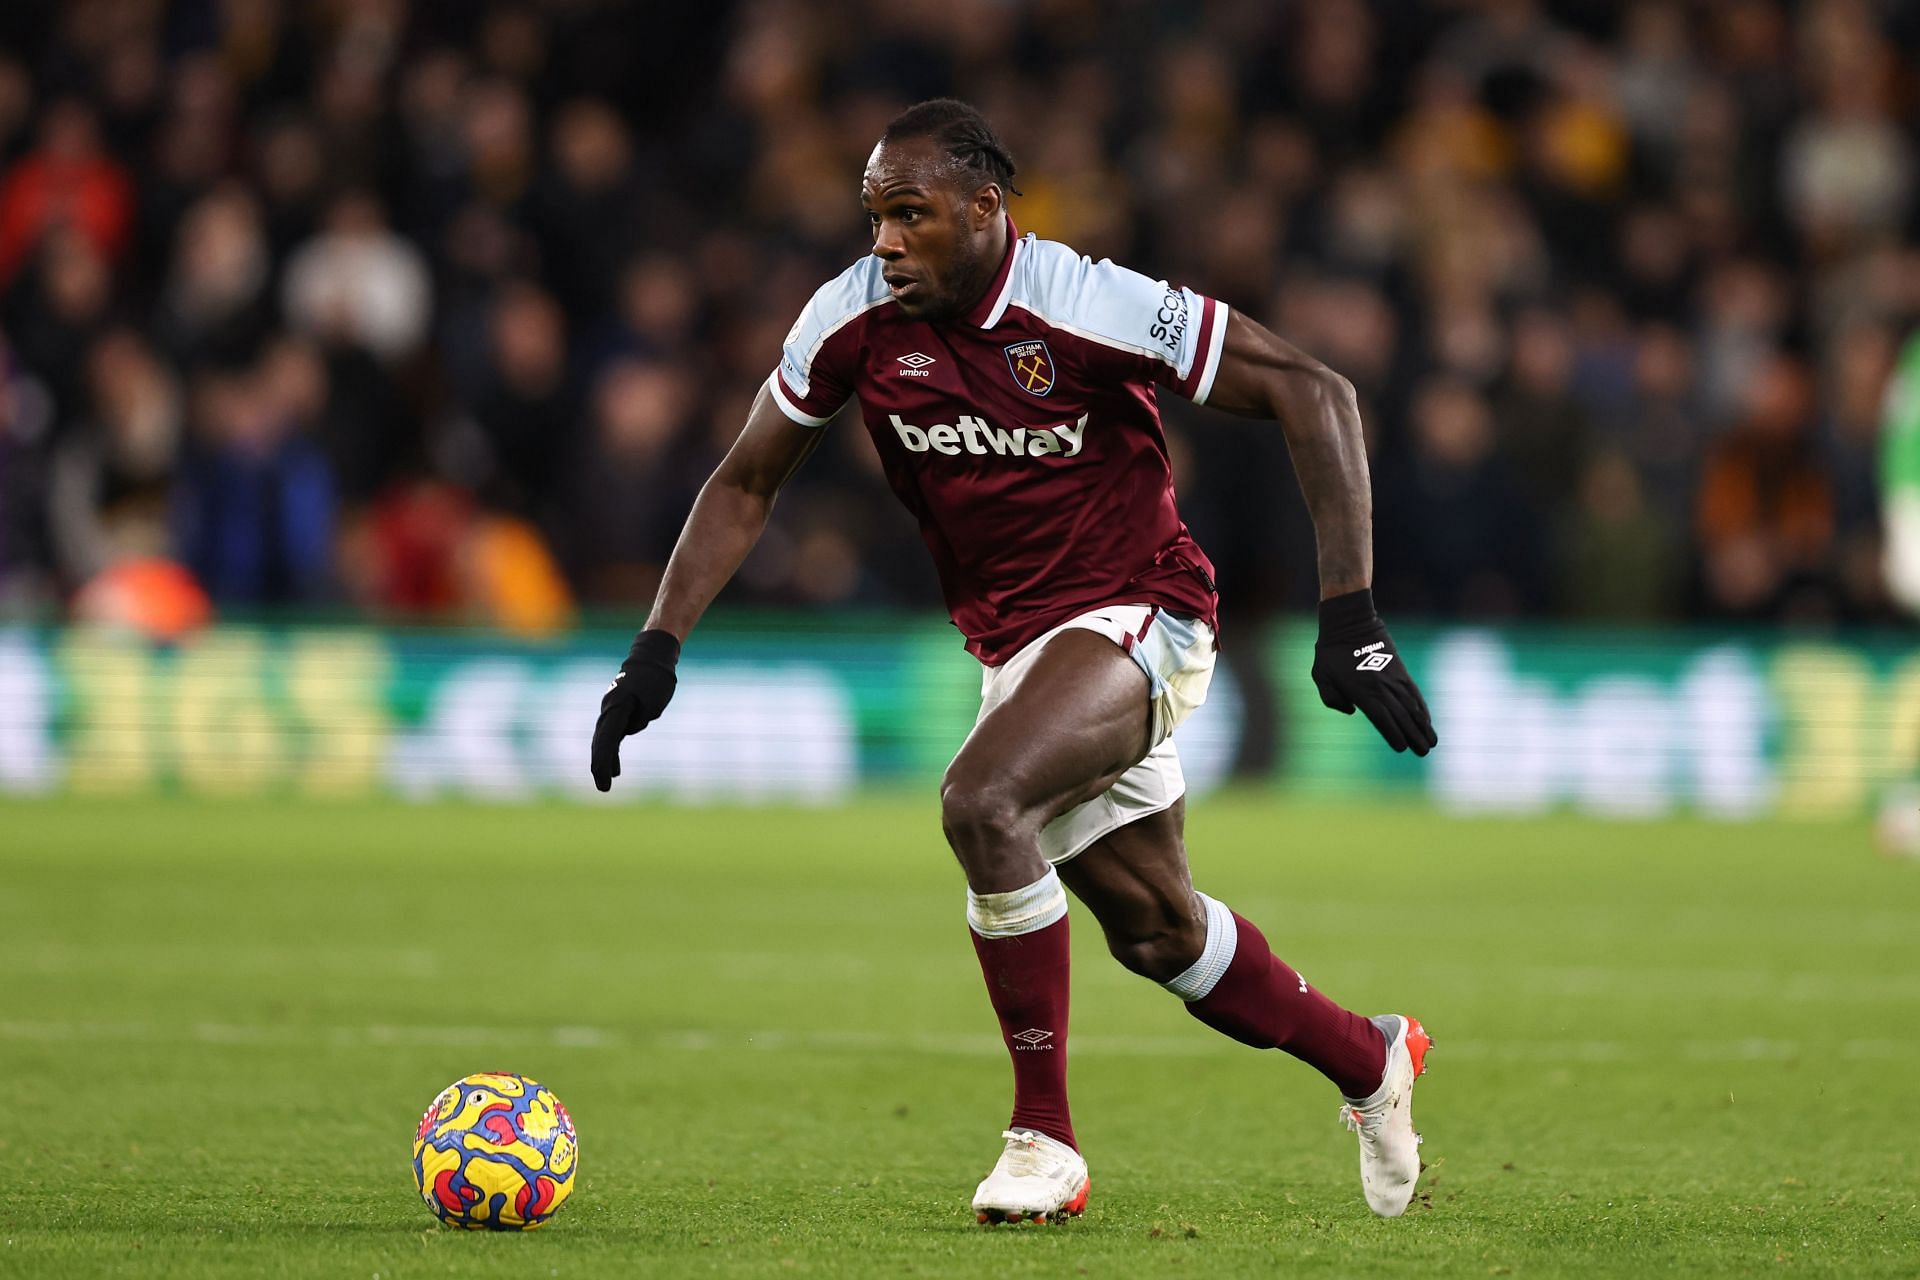 Antonio has made a decent start to his campaign for West Ham United.